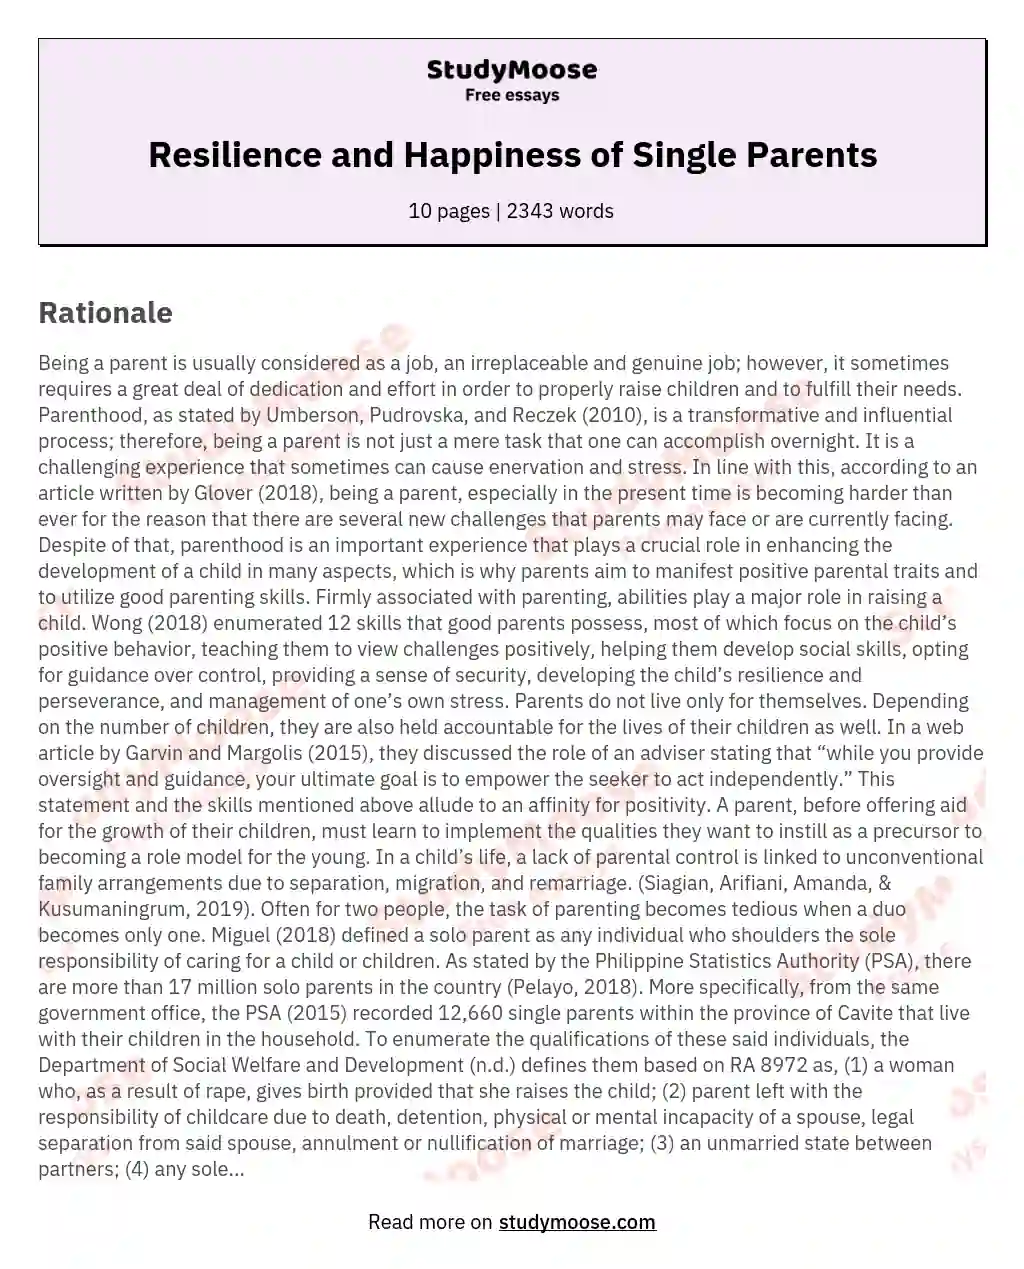 Resilience and Happiness of Single Parents